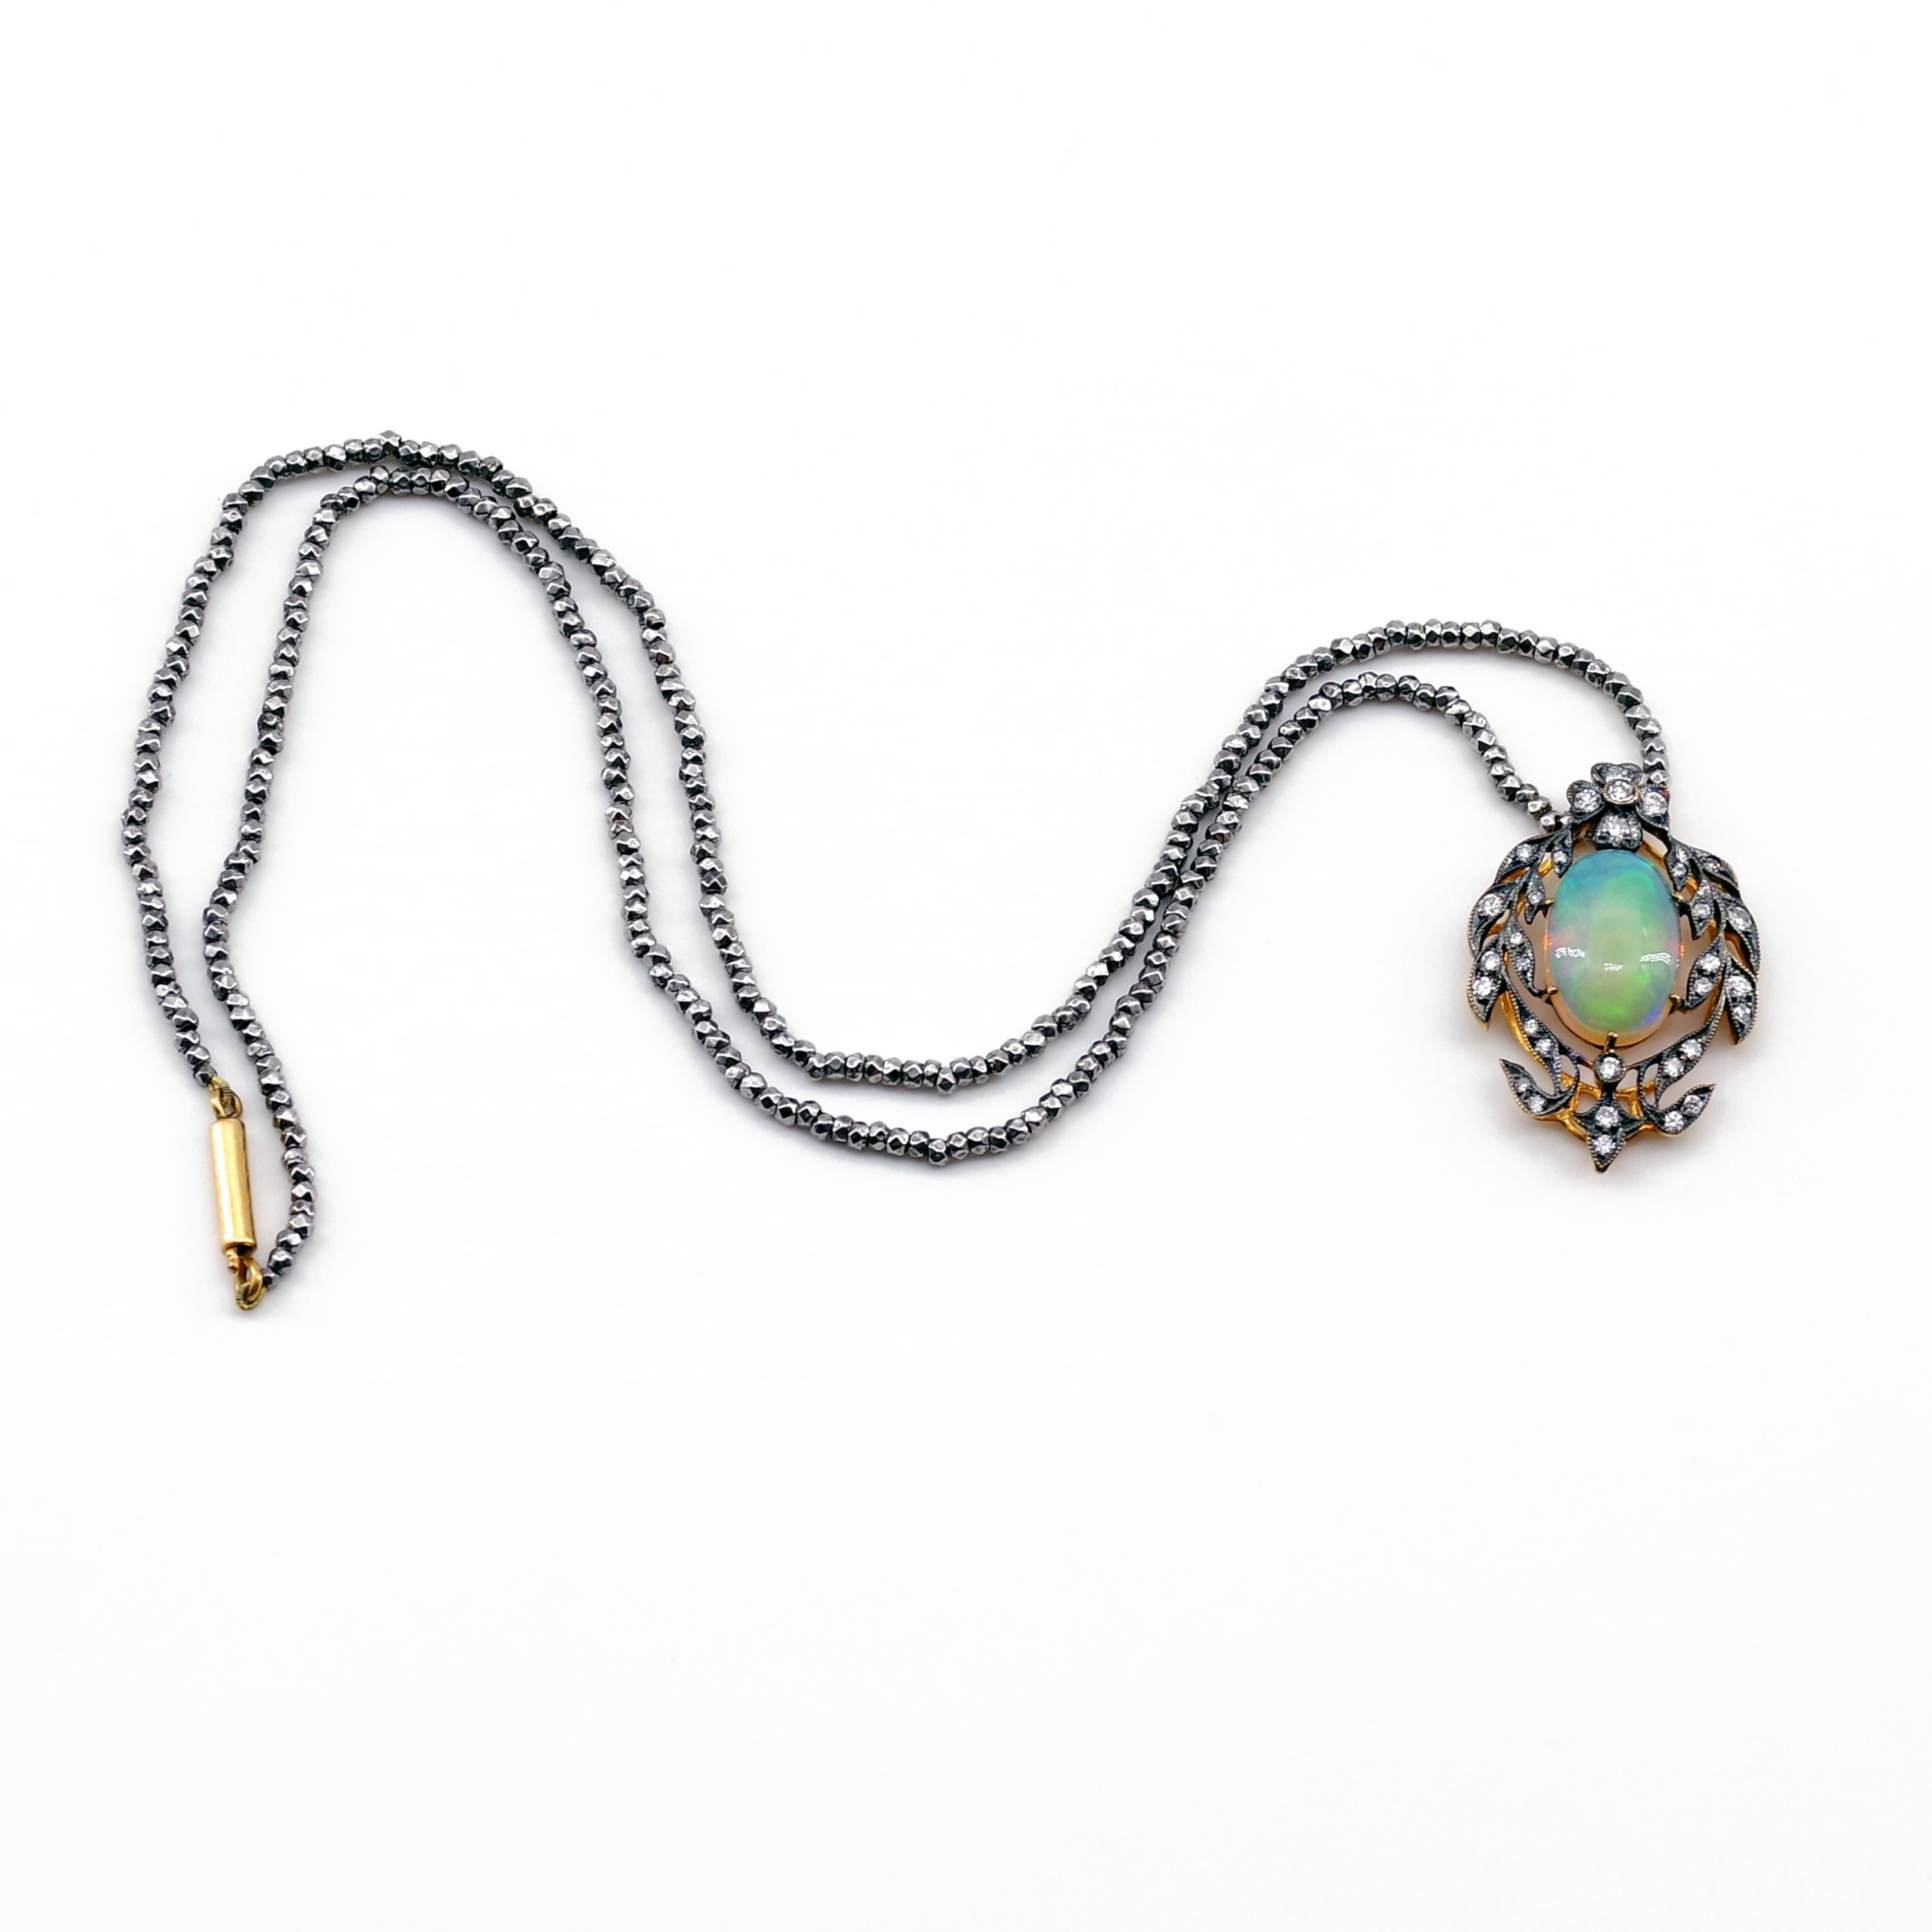 Women's Victorian Opal and Diamond Pendant of Beguiling Beauty on Cut Steel Chain